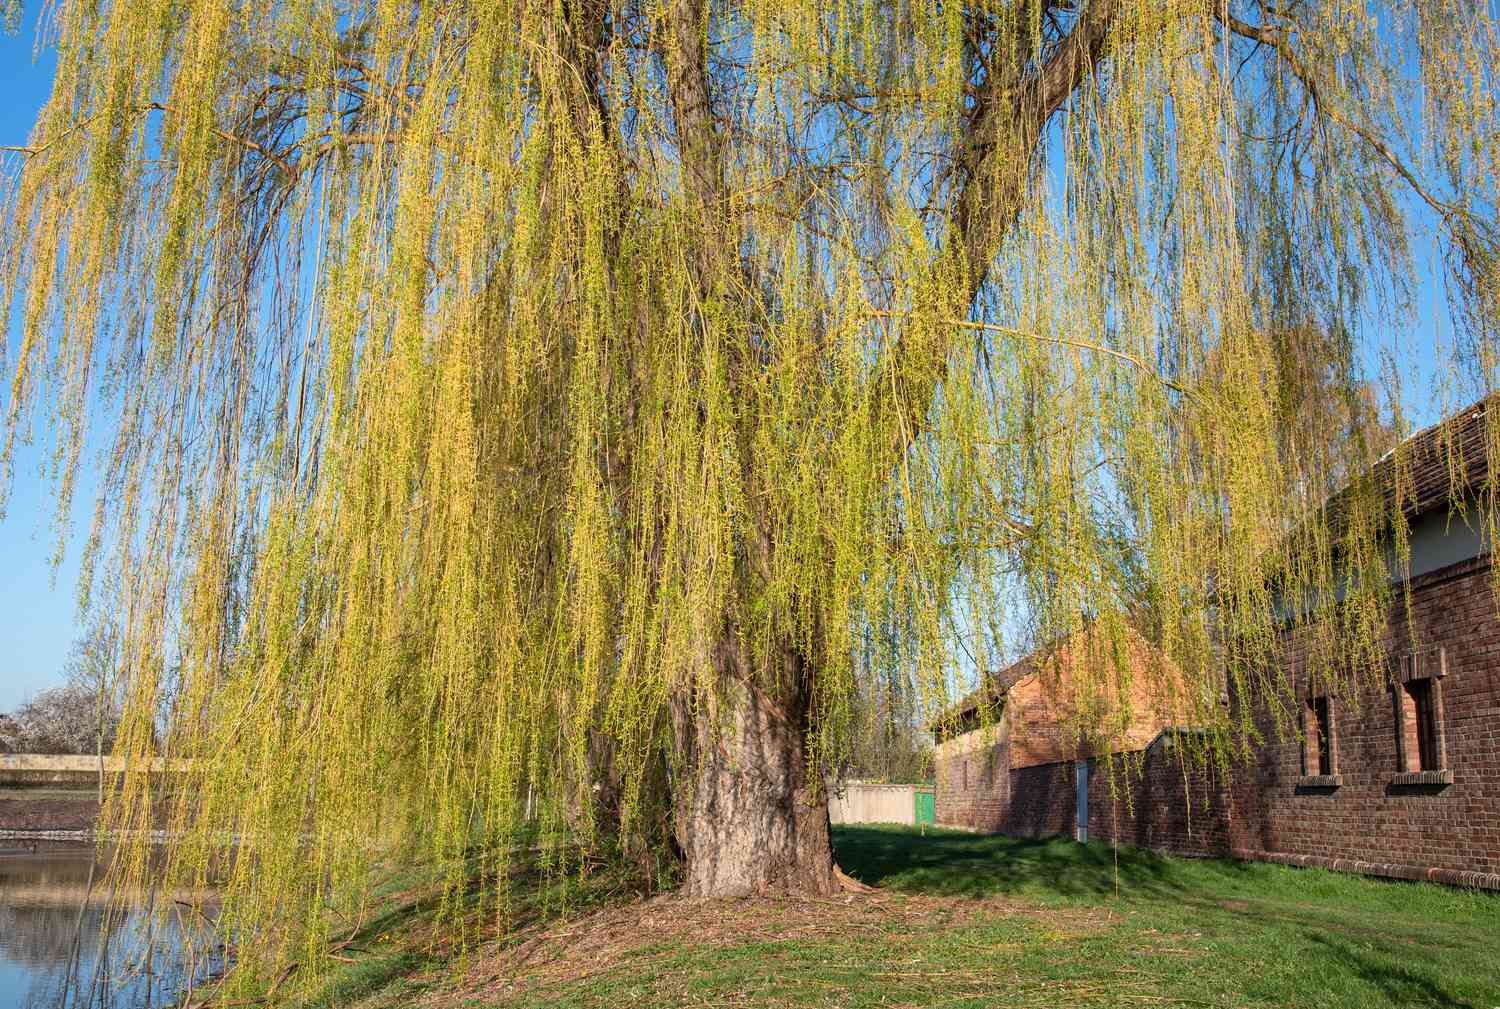 Where Are Willow Trees Found